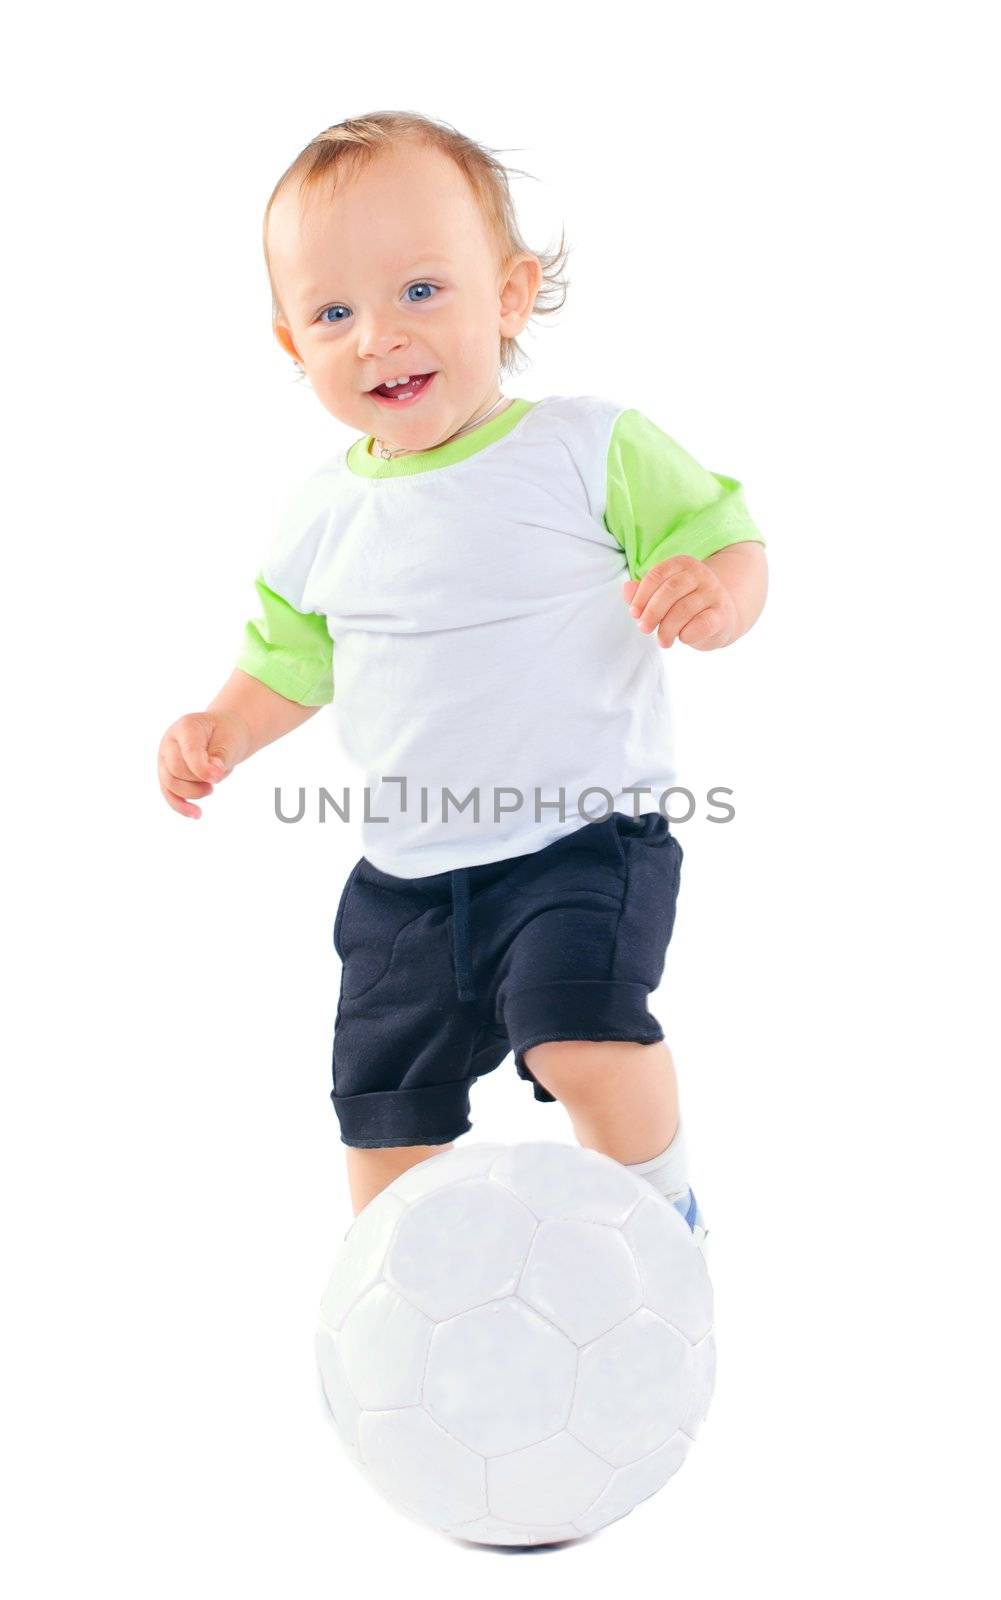 Cute 1 years old boy in sports form with a soccer ball in the studio